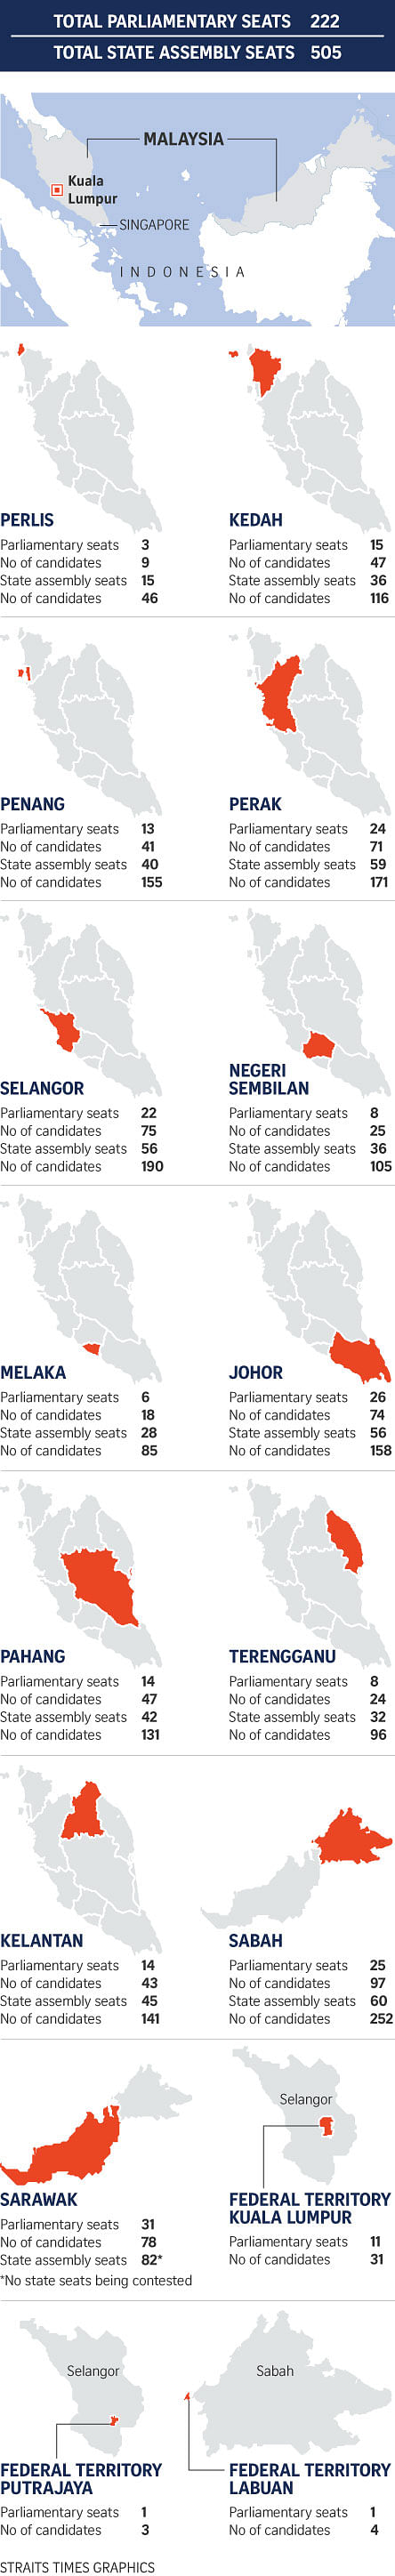 Malaysia Election Nominations Close Campaign For May 9 Polls Begins Se Asia News Top Stories The Straits Times